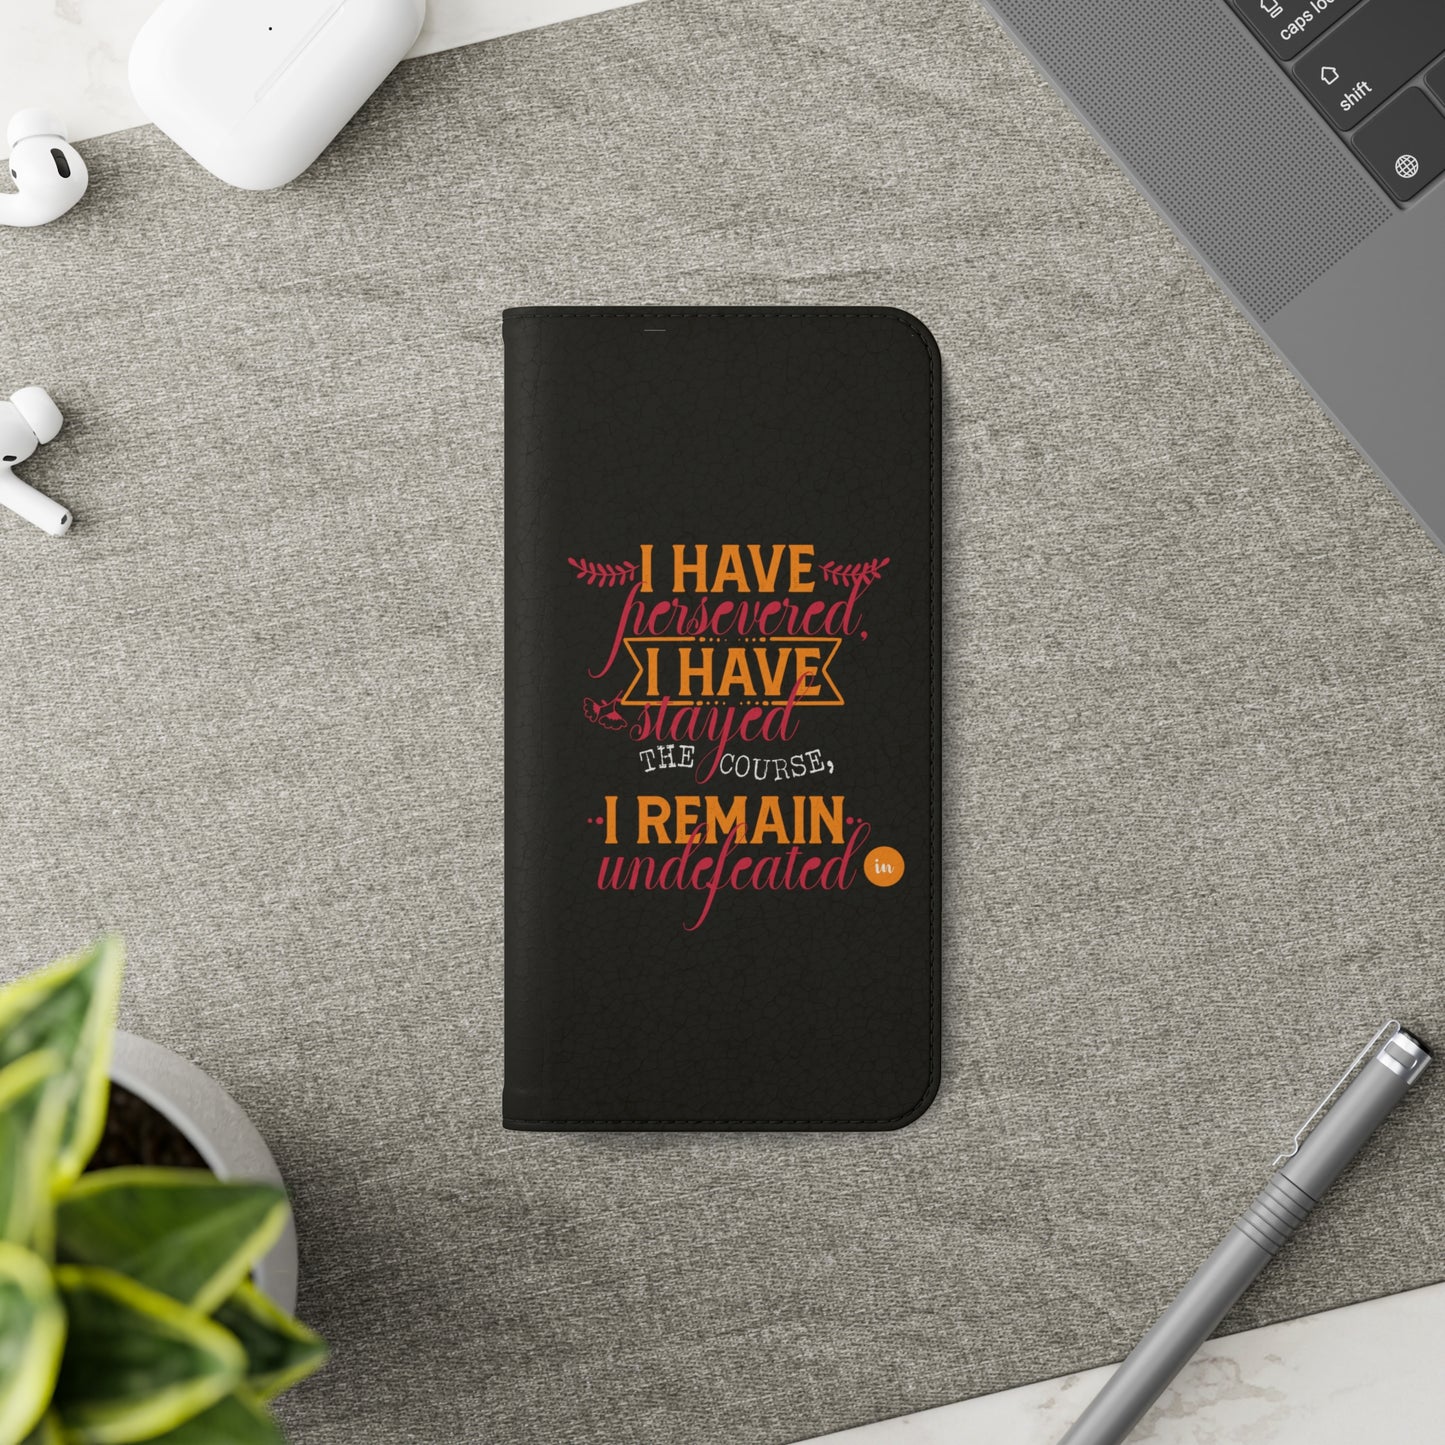 I Have Persevered I Have Stayed The Course I Remain Undefeated In Christ Phone Flip Cases